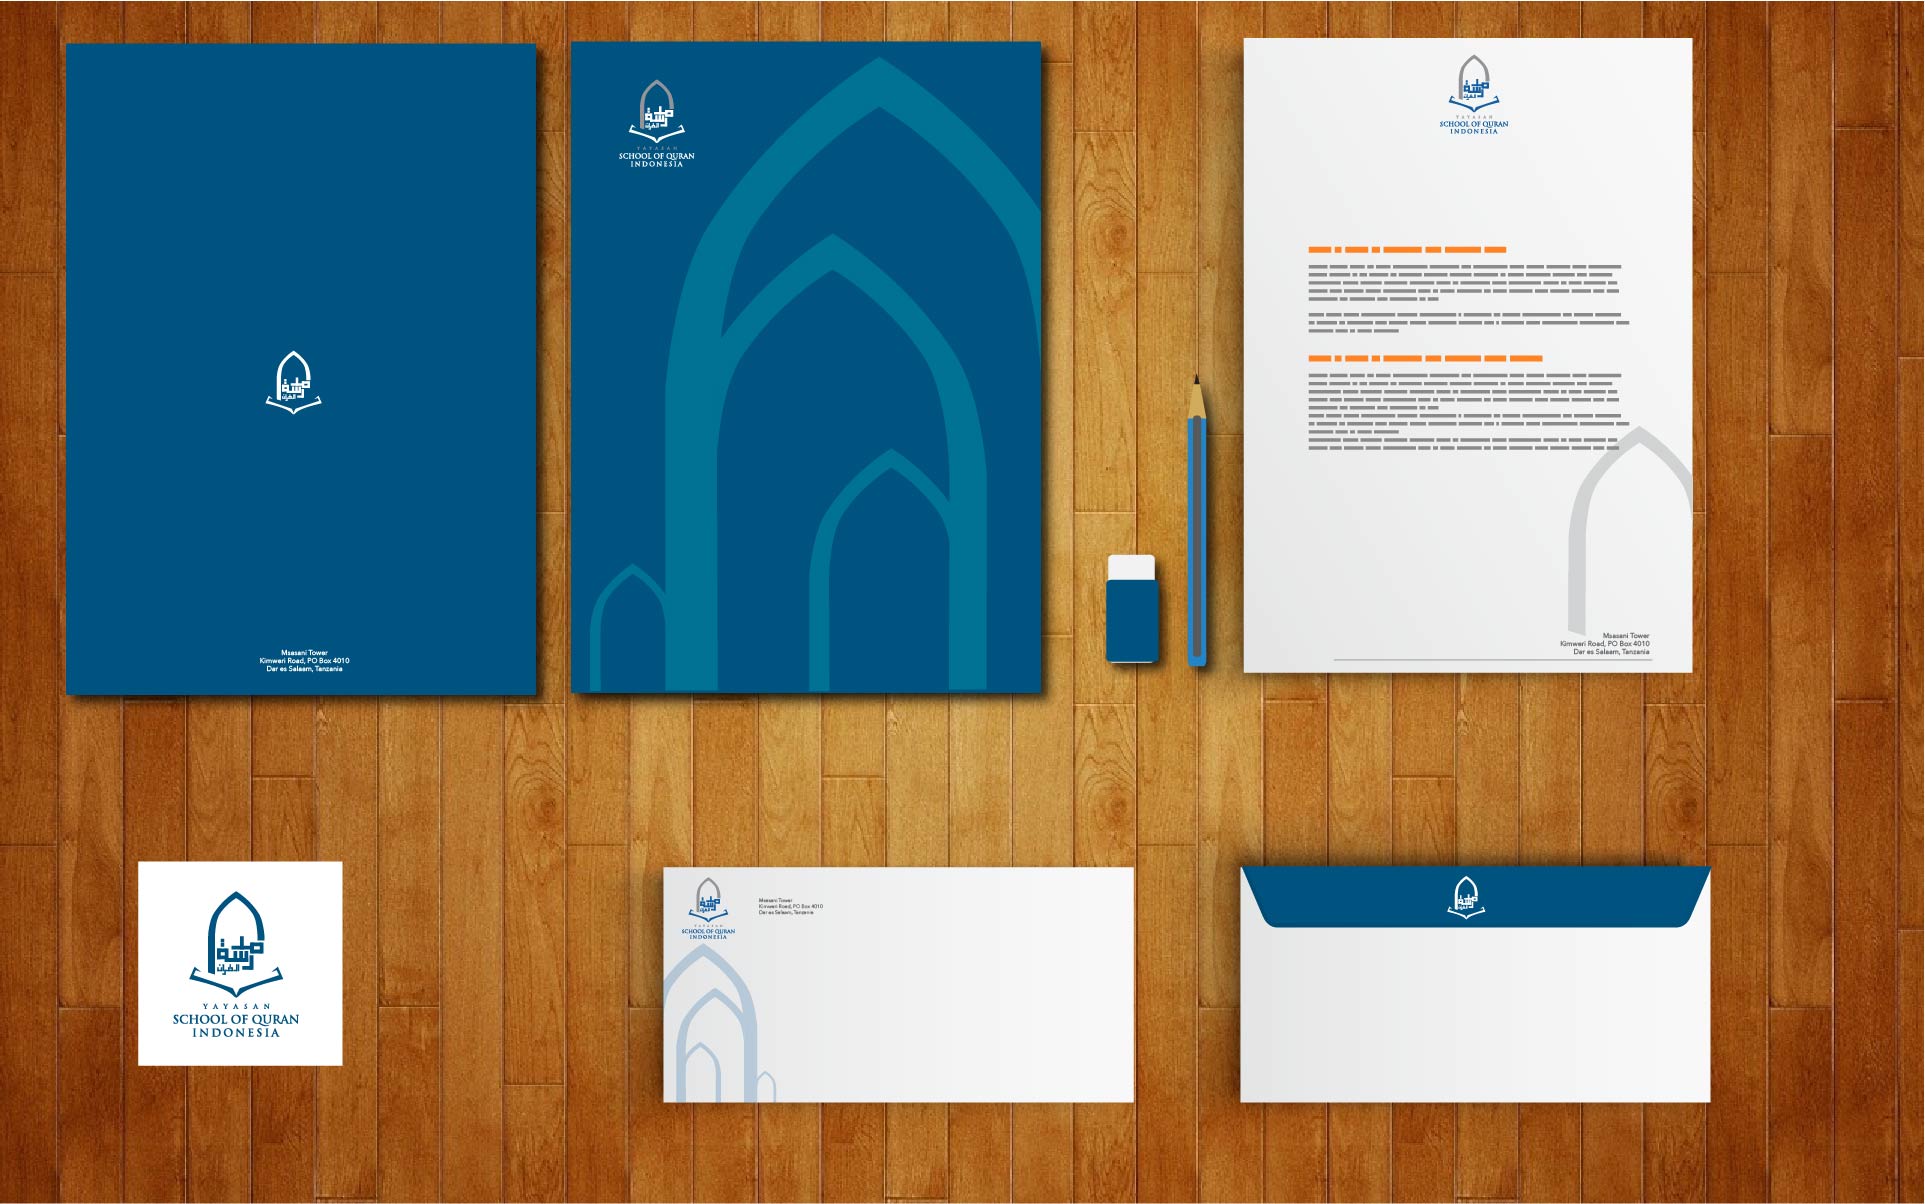 Corporate Identity House of Quran